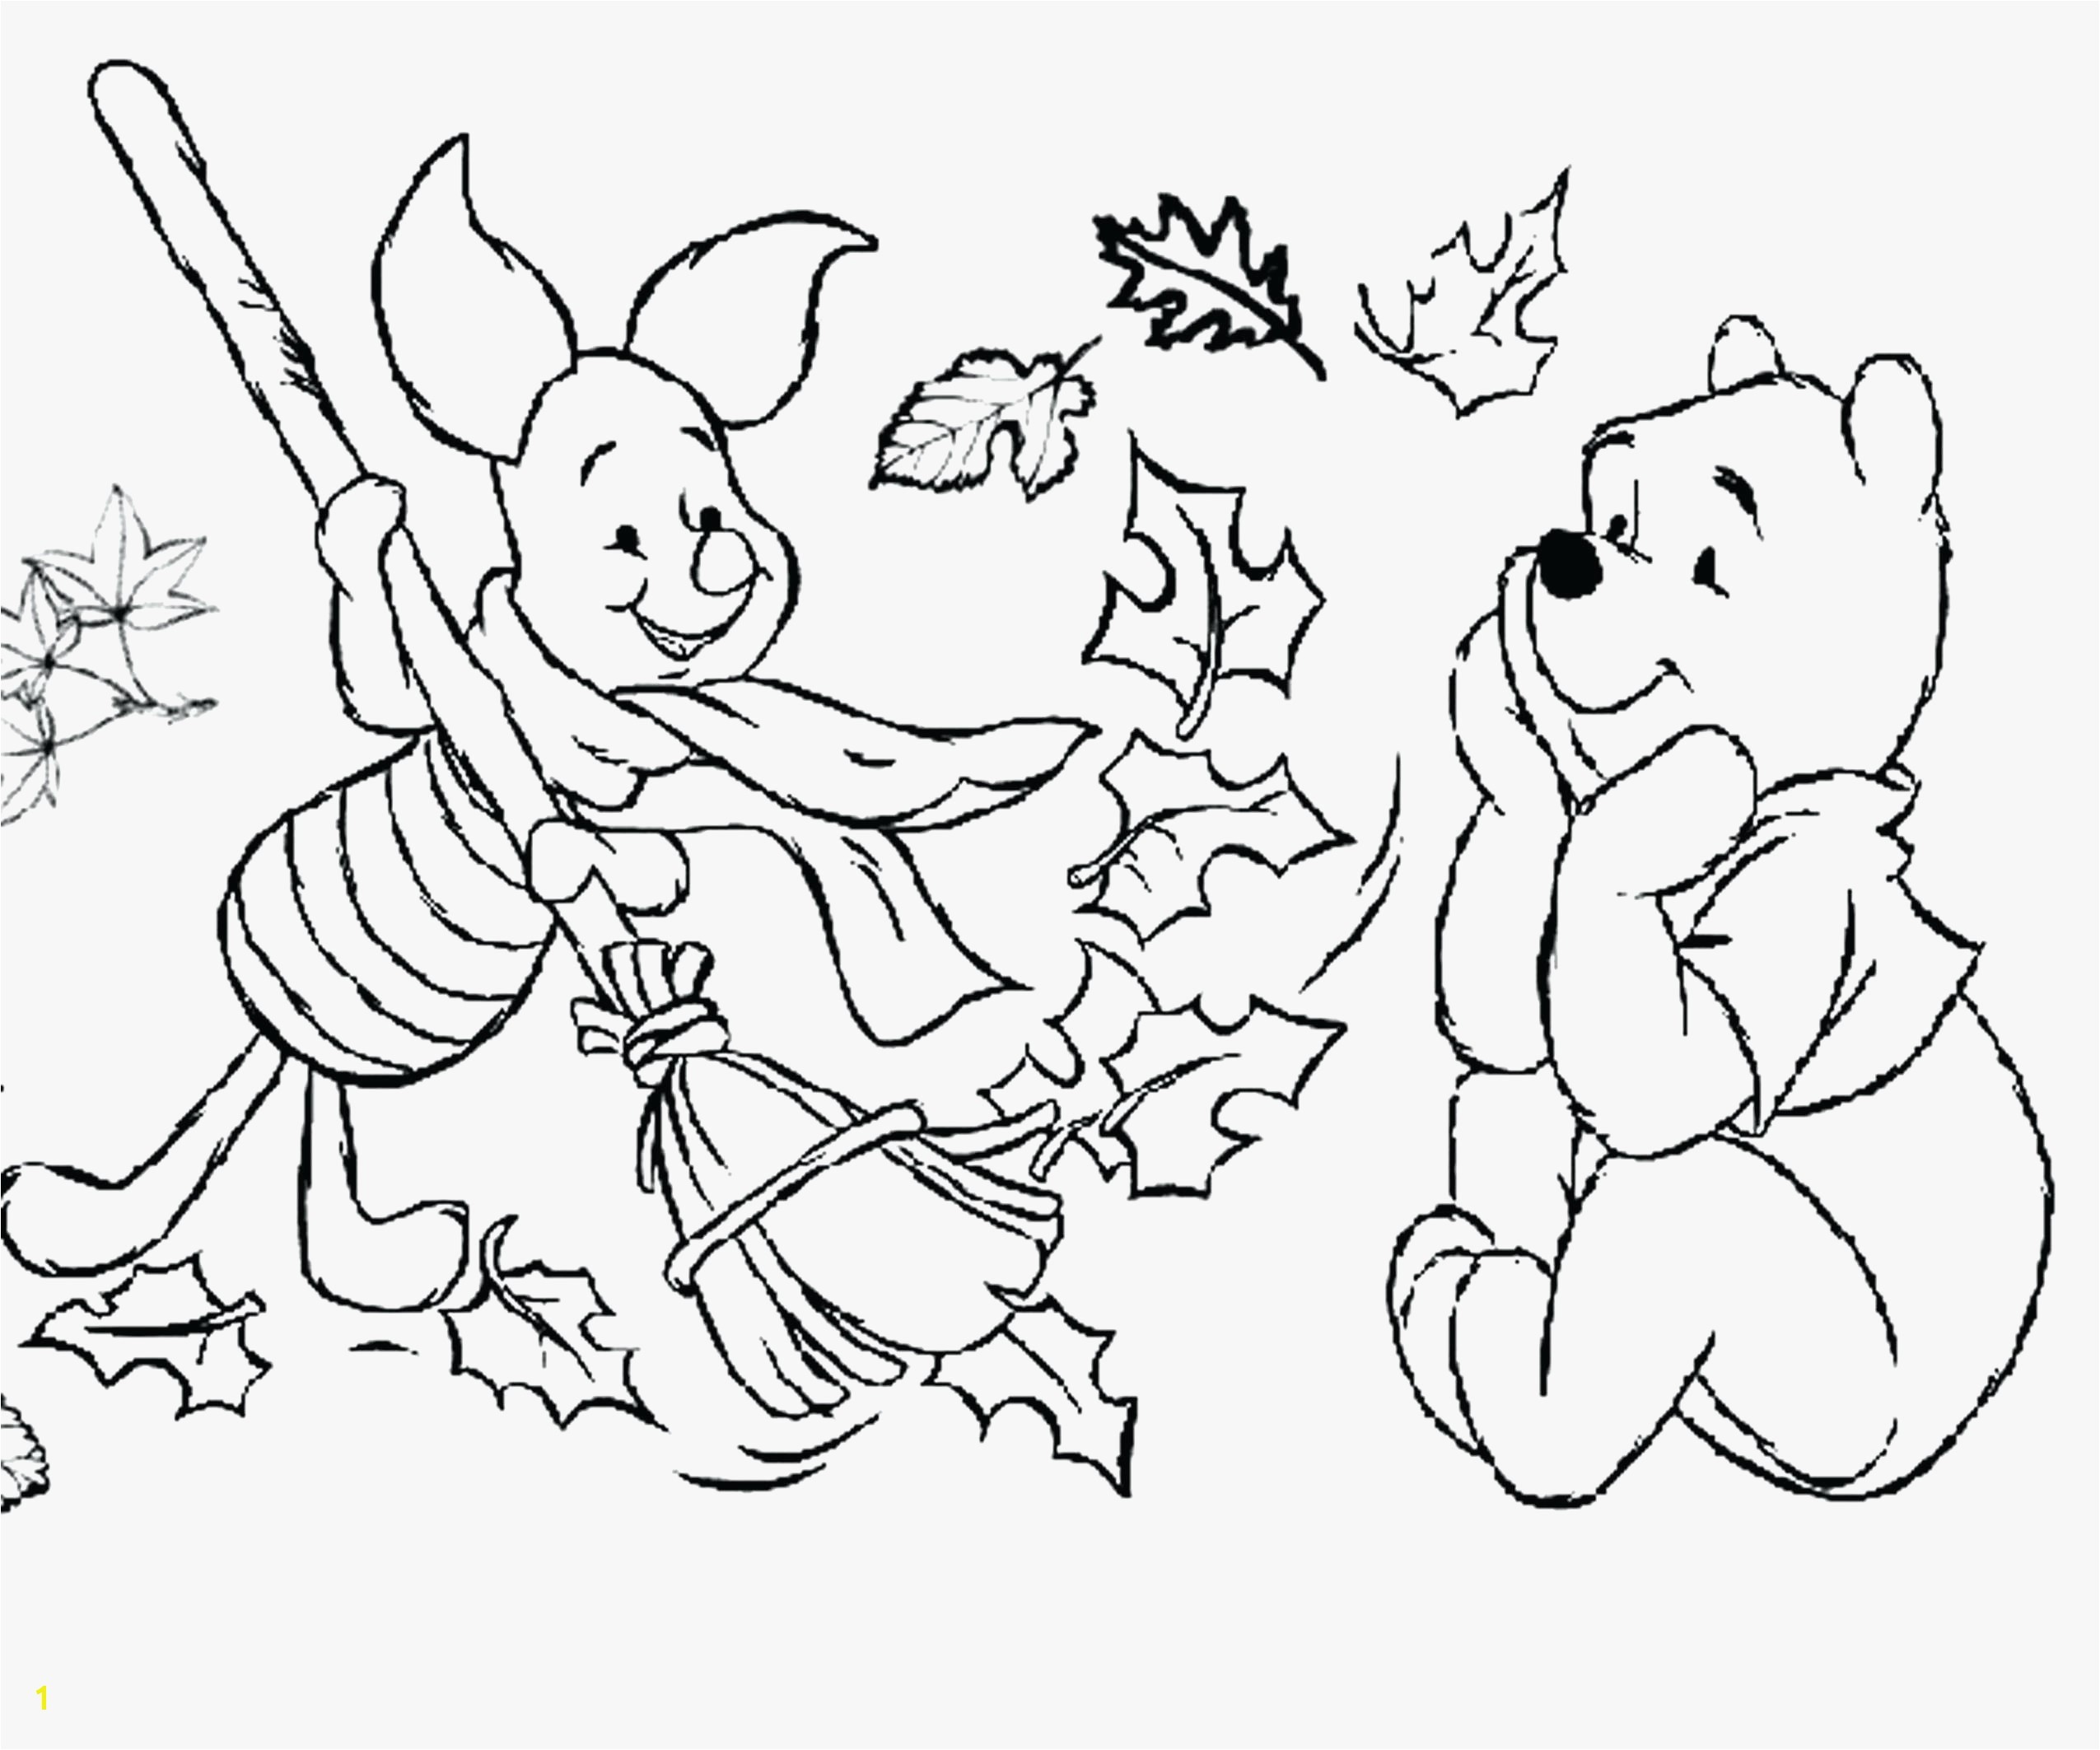 Turn Picture Into Coloring Page Photoshop 12 New Fall Printable Coloring Pages